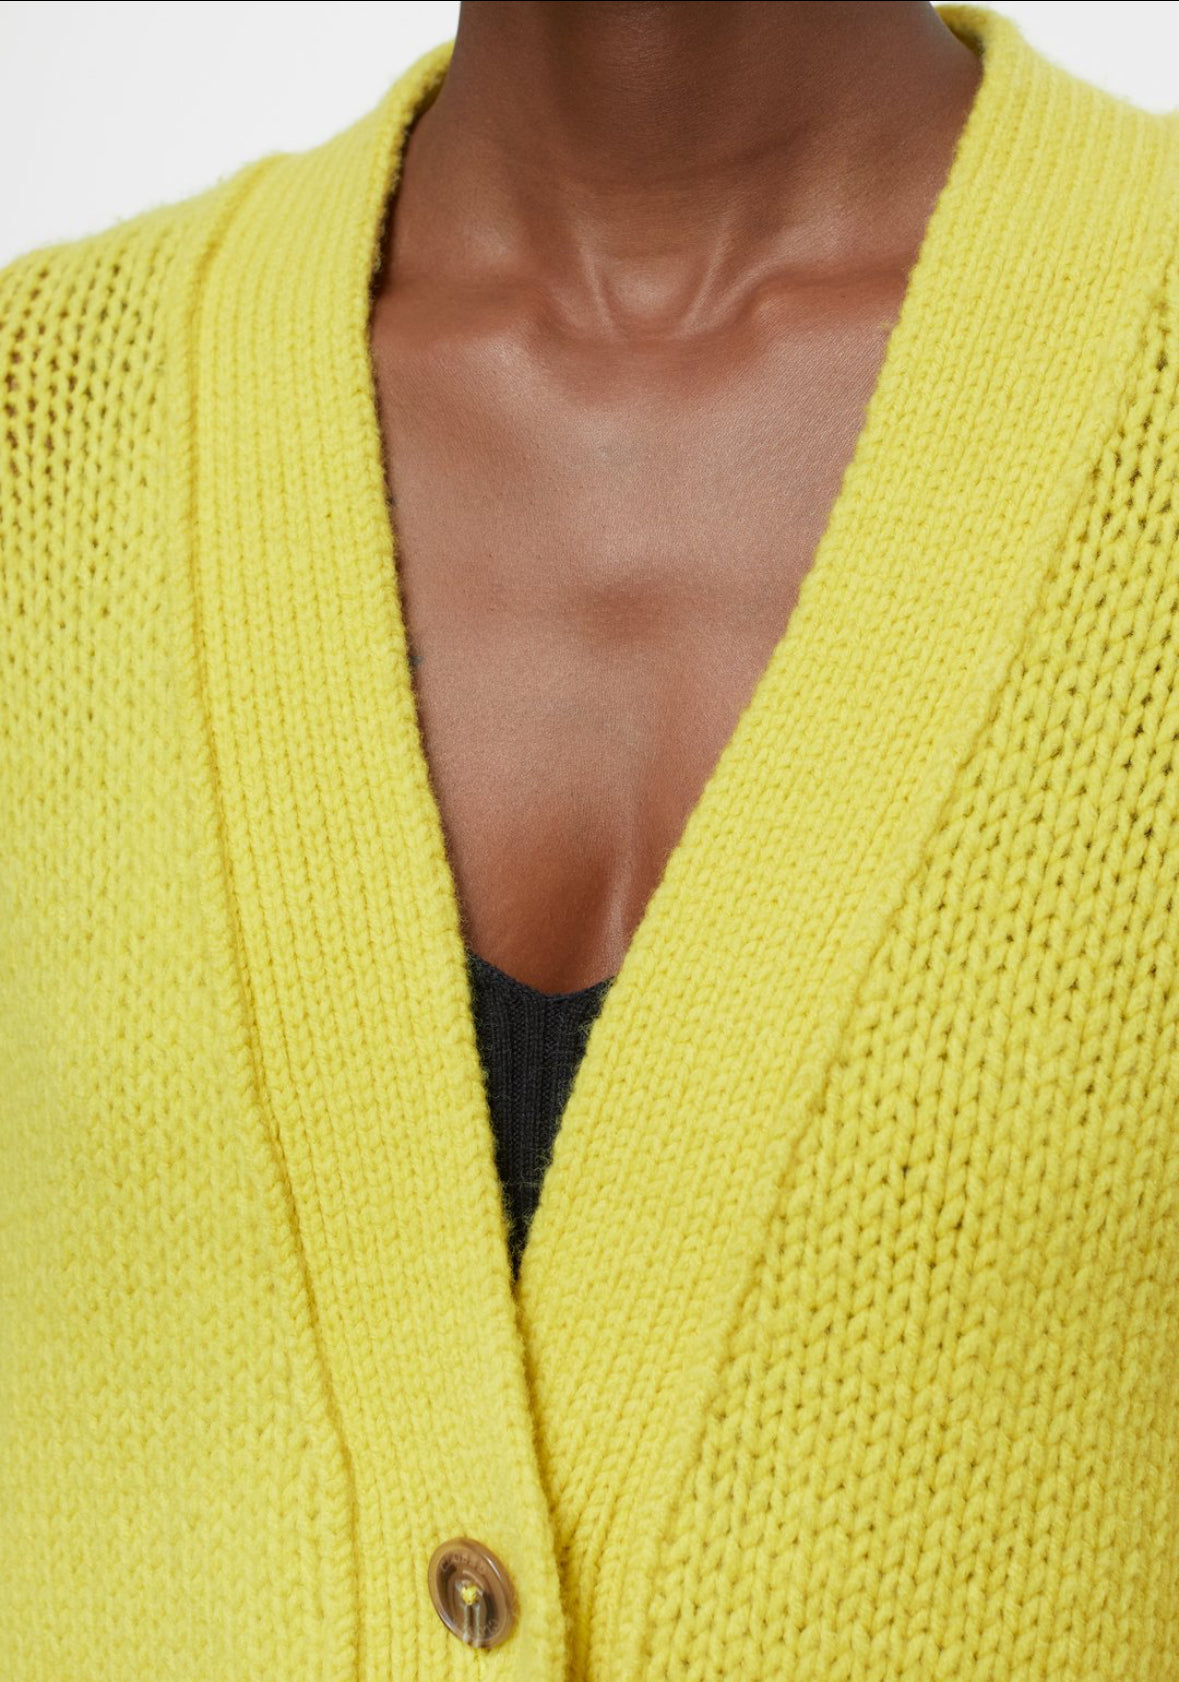 CLOSED Chunky Knit Cardigan in Primary Yellow